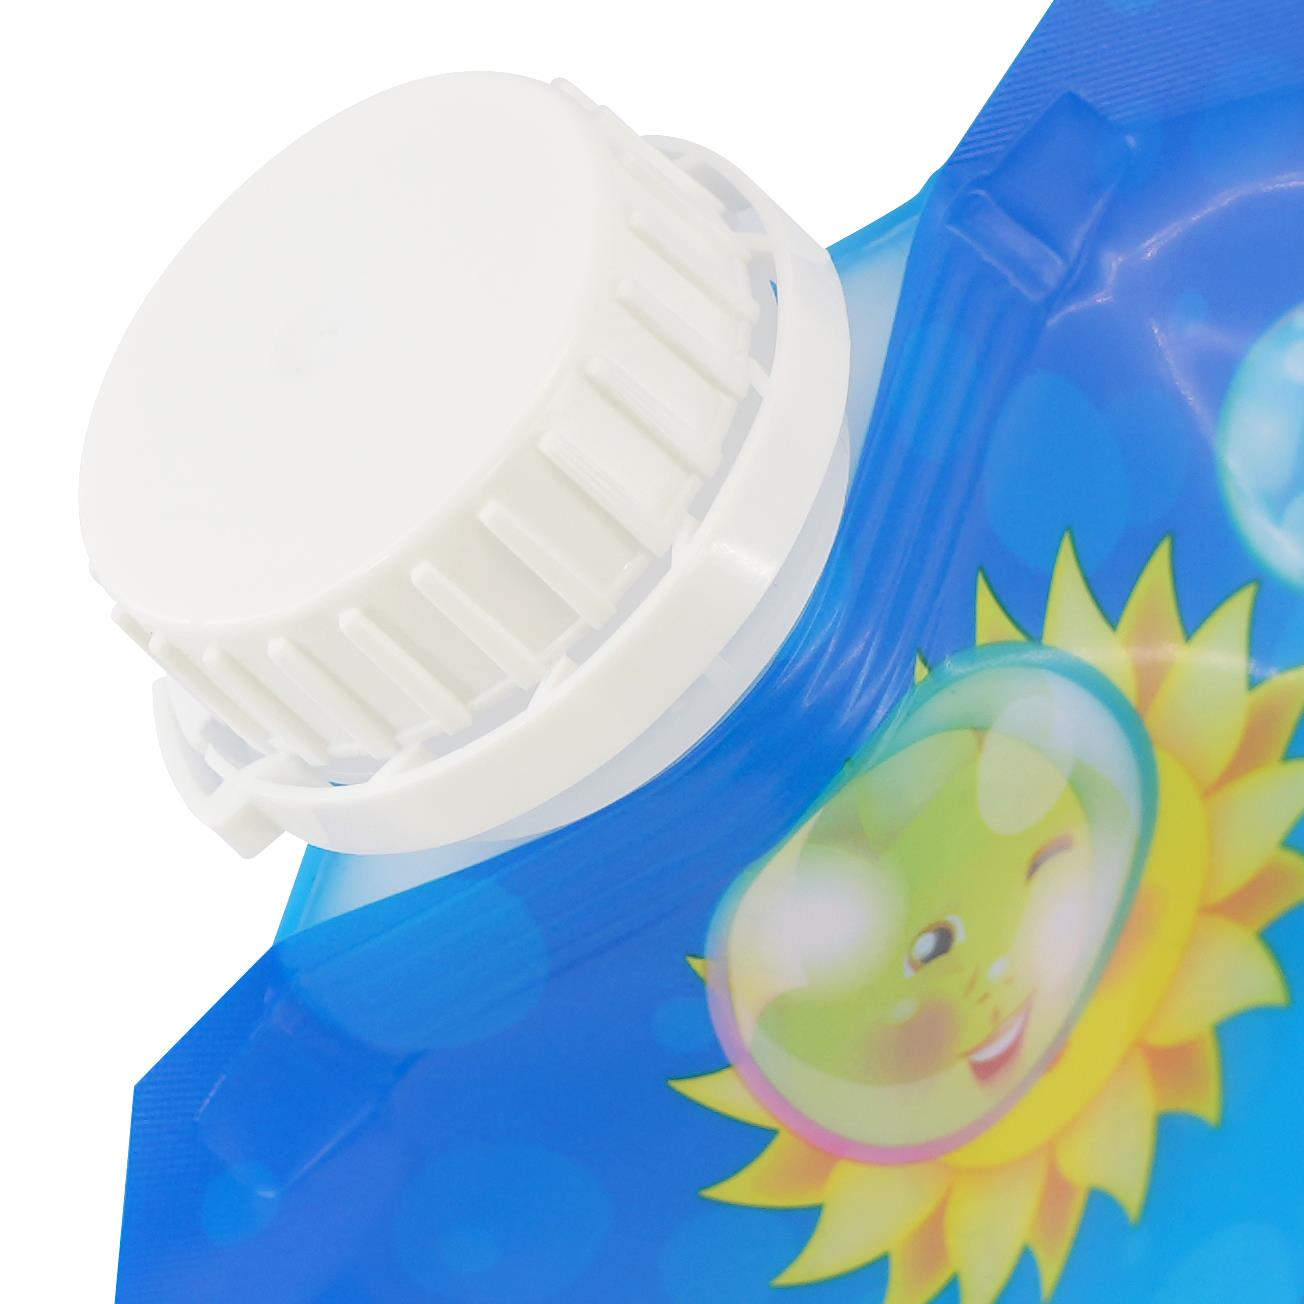 Bubble Blow Maker Concentrate Refill Liquid 80 ML by The Magic Toy Shop - UKBuyZone